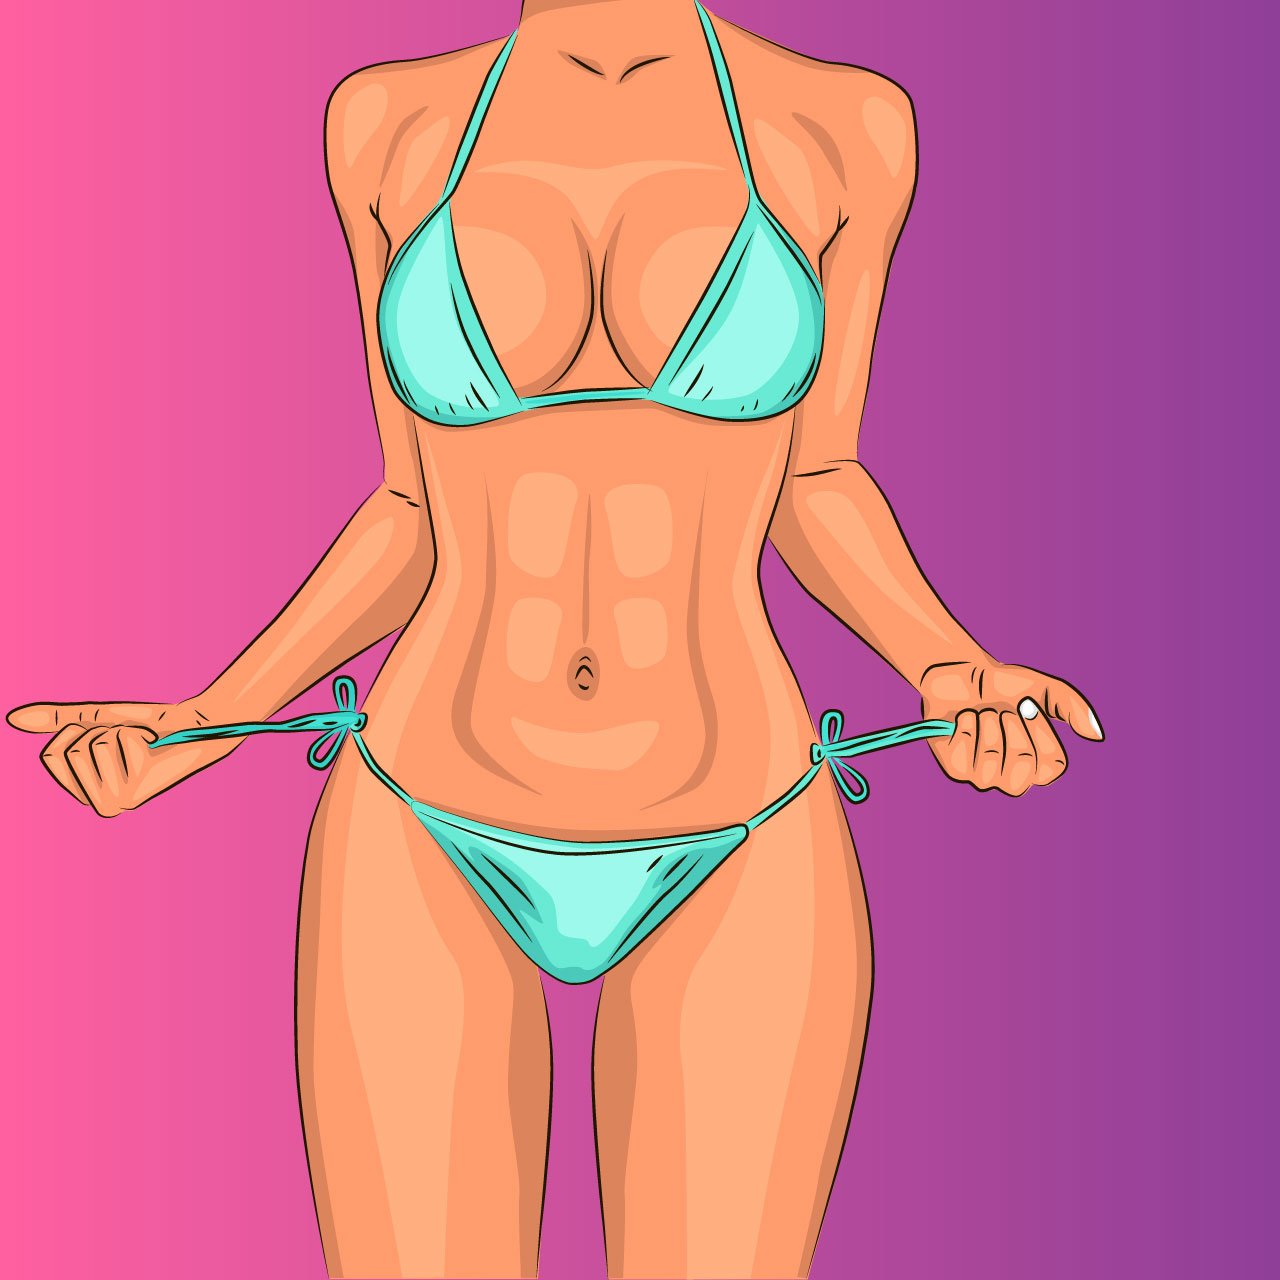 Sexy young girl swimsuit cartoon illustration image hand drawing sketch